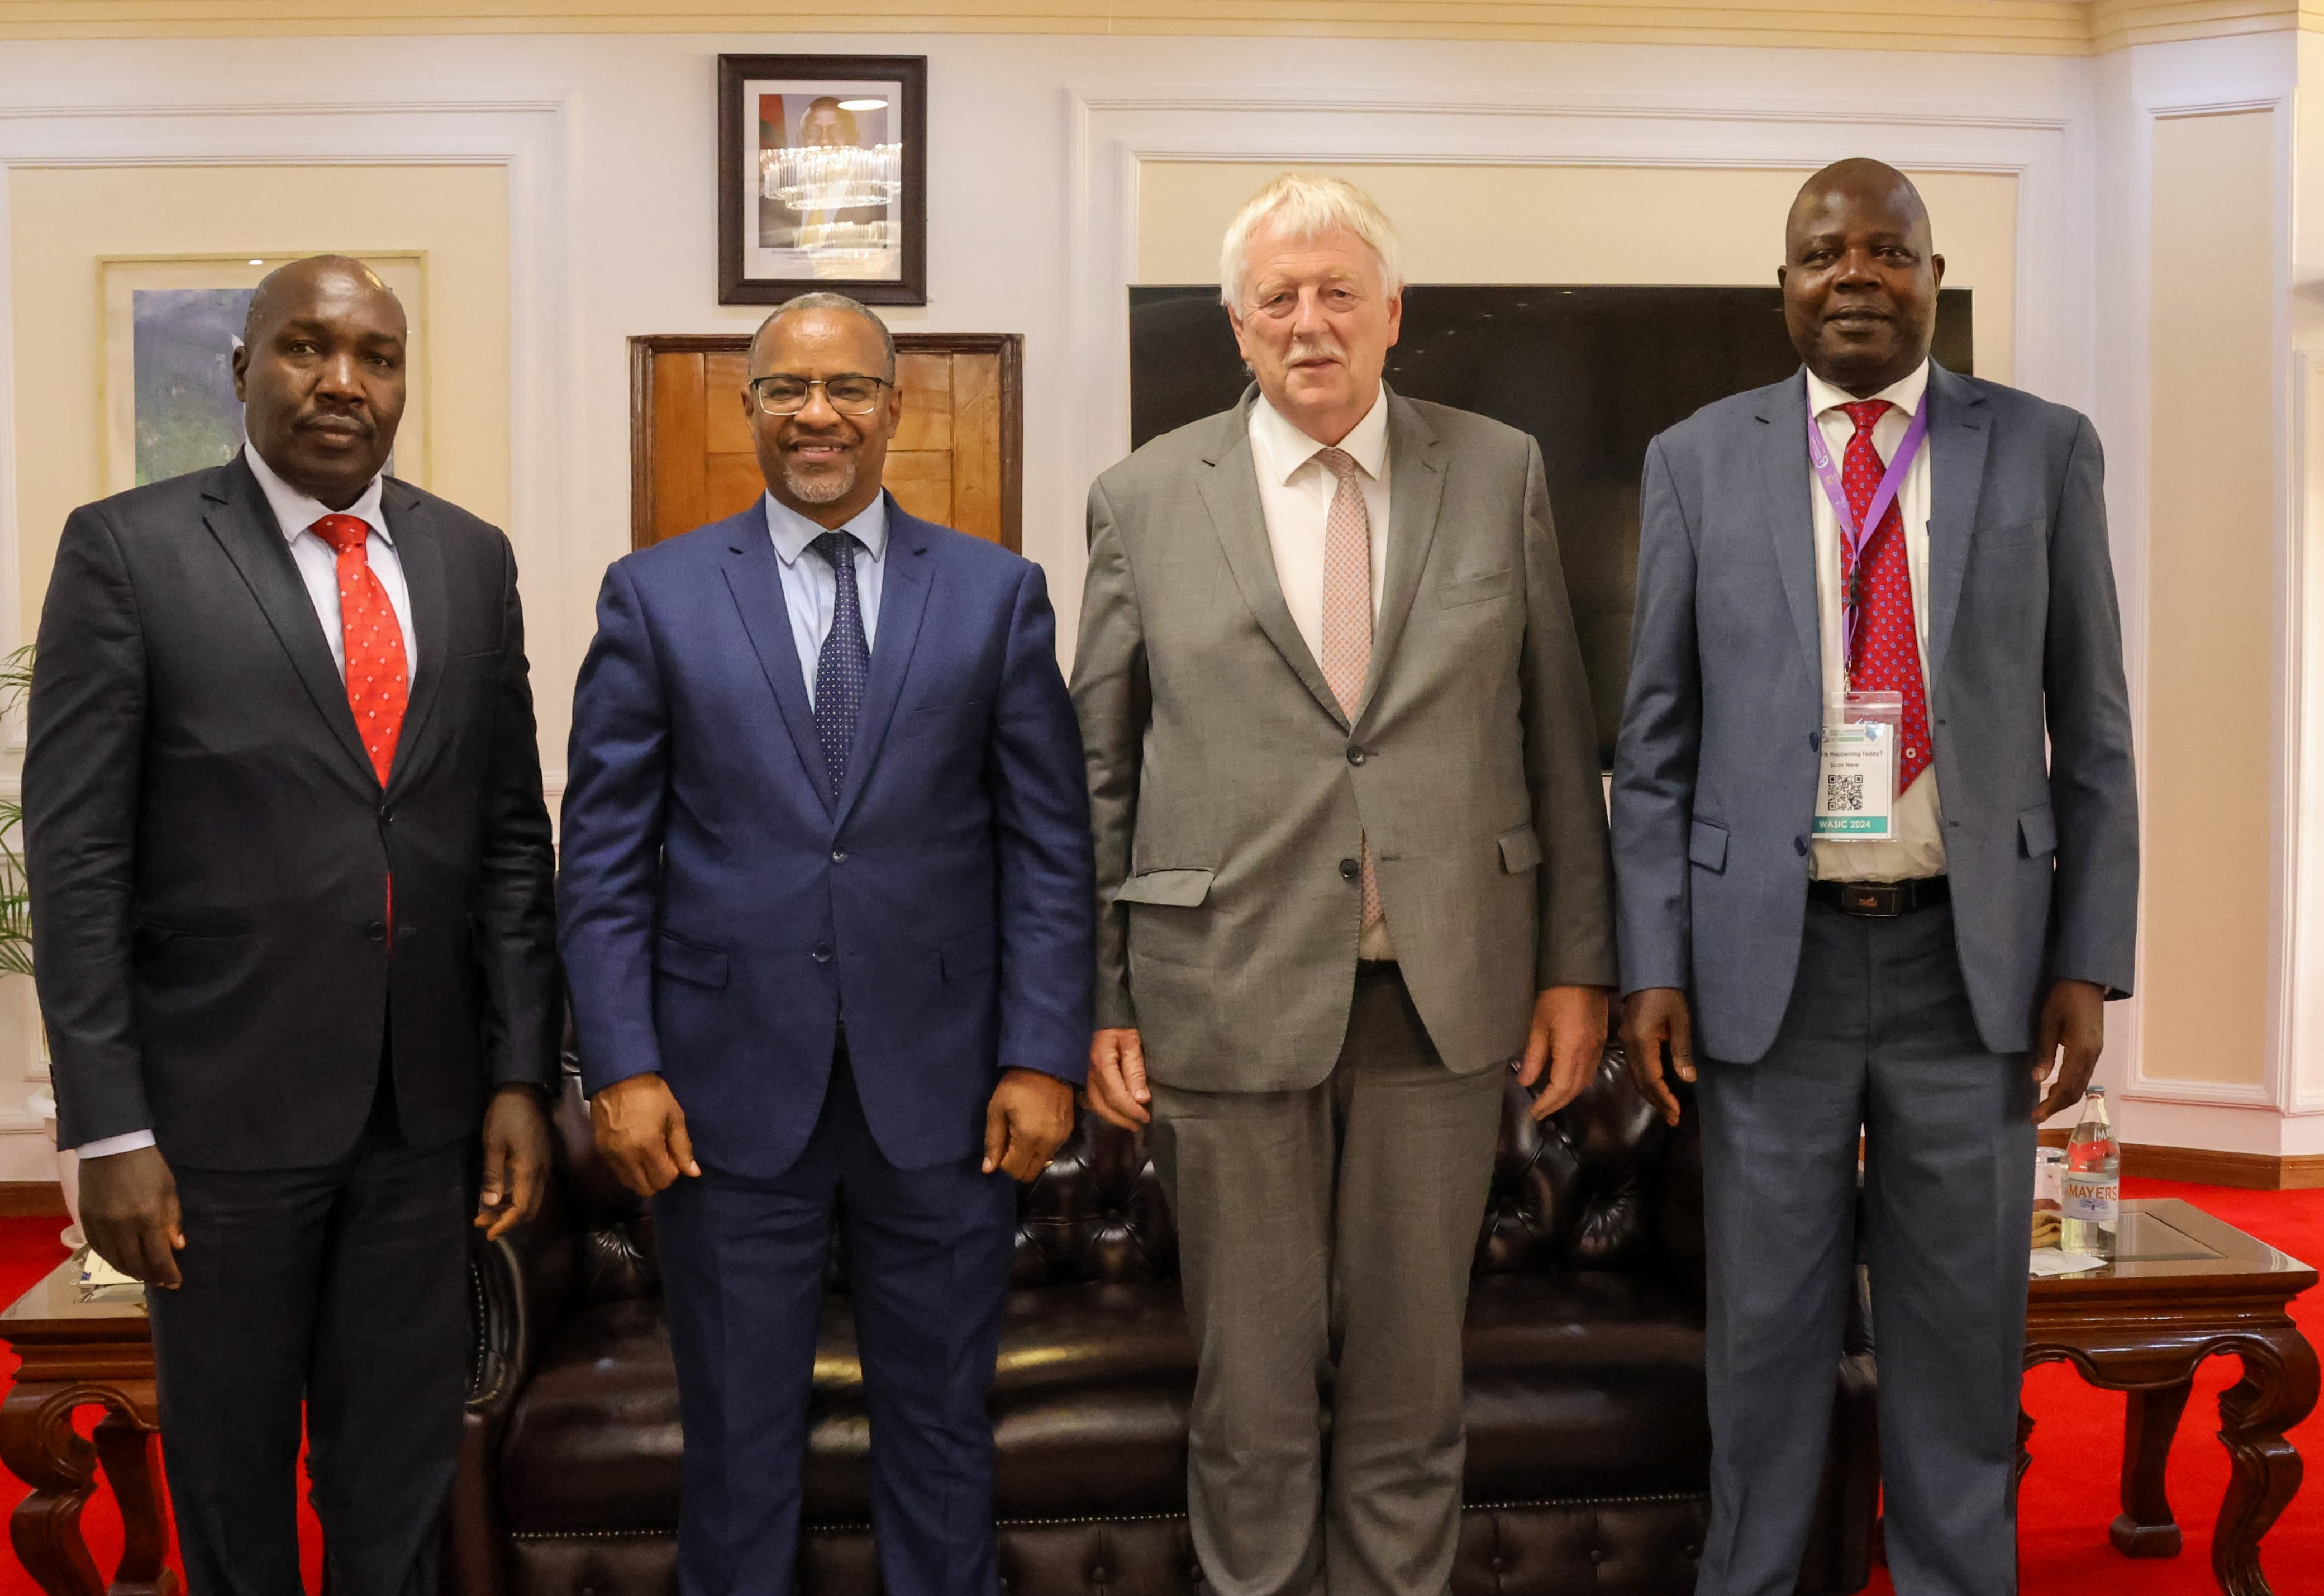 Ambassador Maarten Brouwer pictured with the Cabinet Secretary (second from the left) and the Principal Secretary (first from the left) from the Ministry of Water, Sanitation, and Irrigation